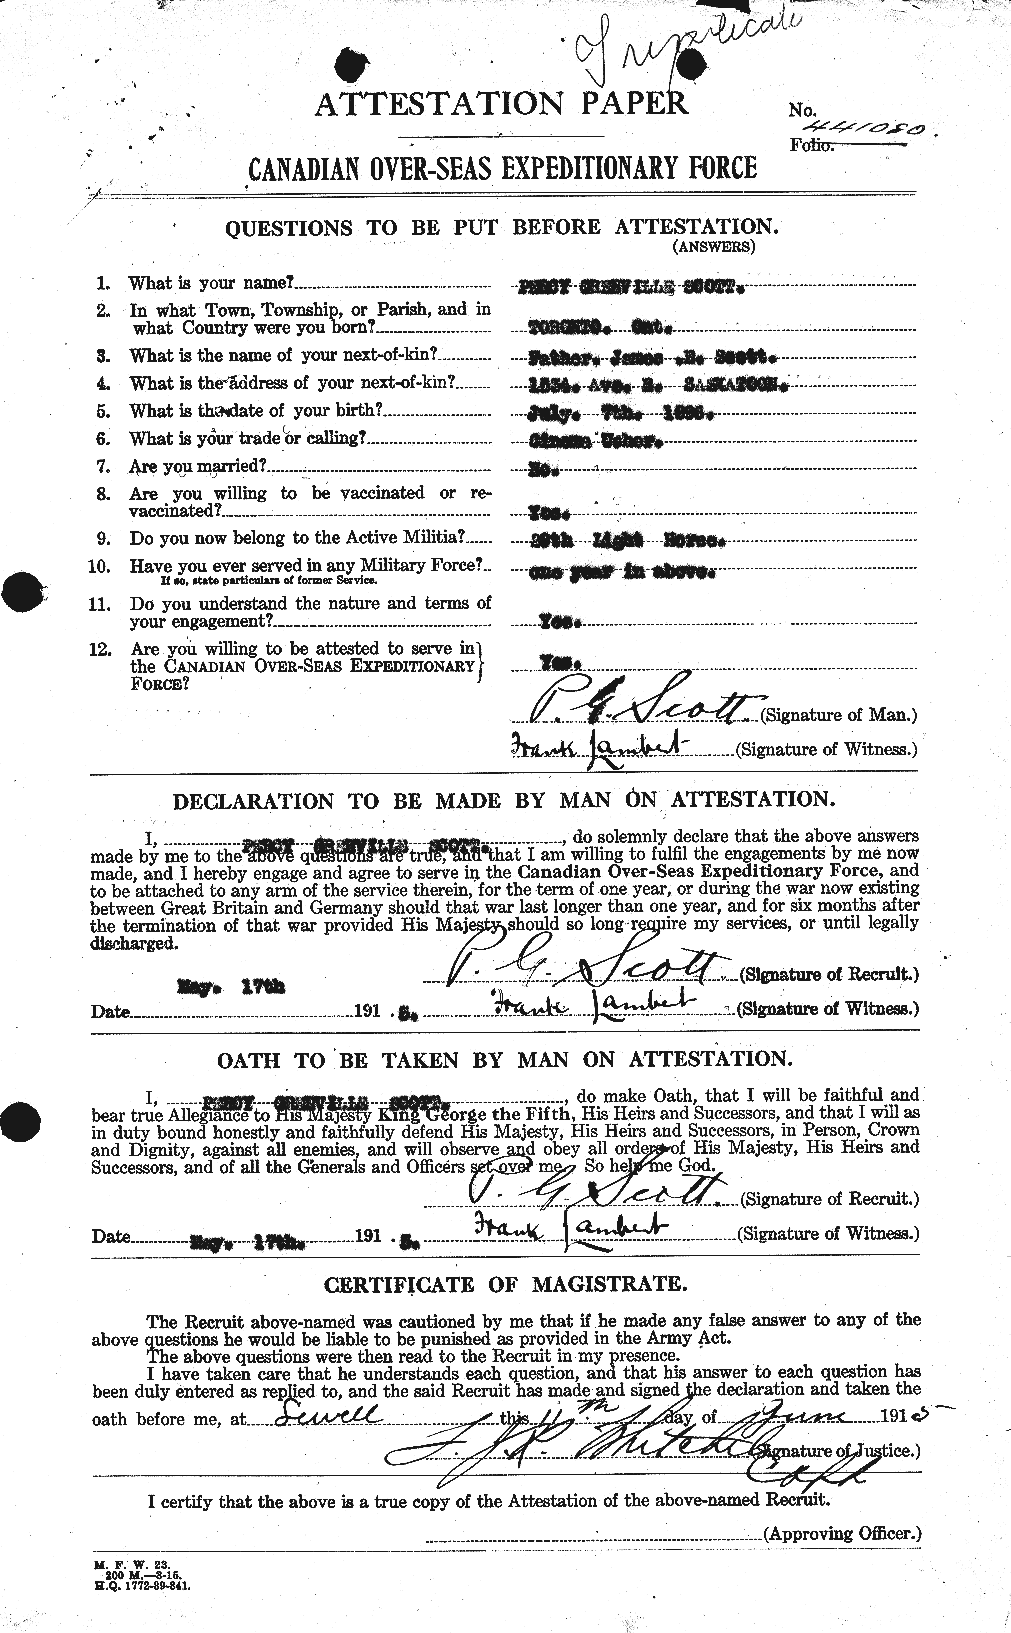 Personnel Records of the First World War - CEF 090226a